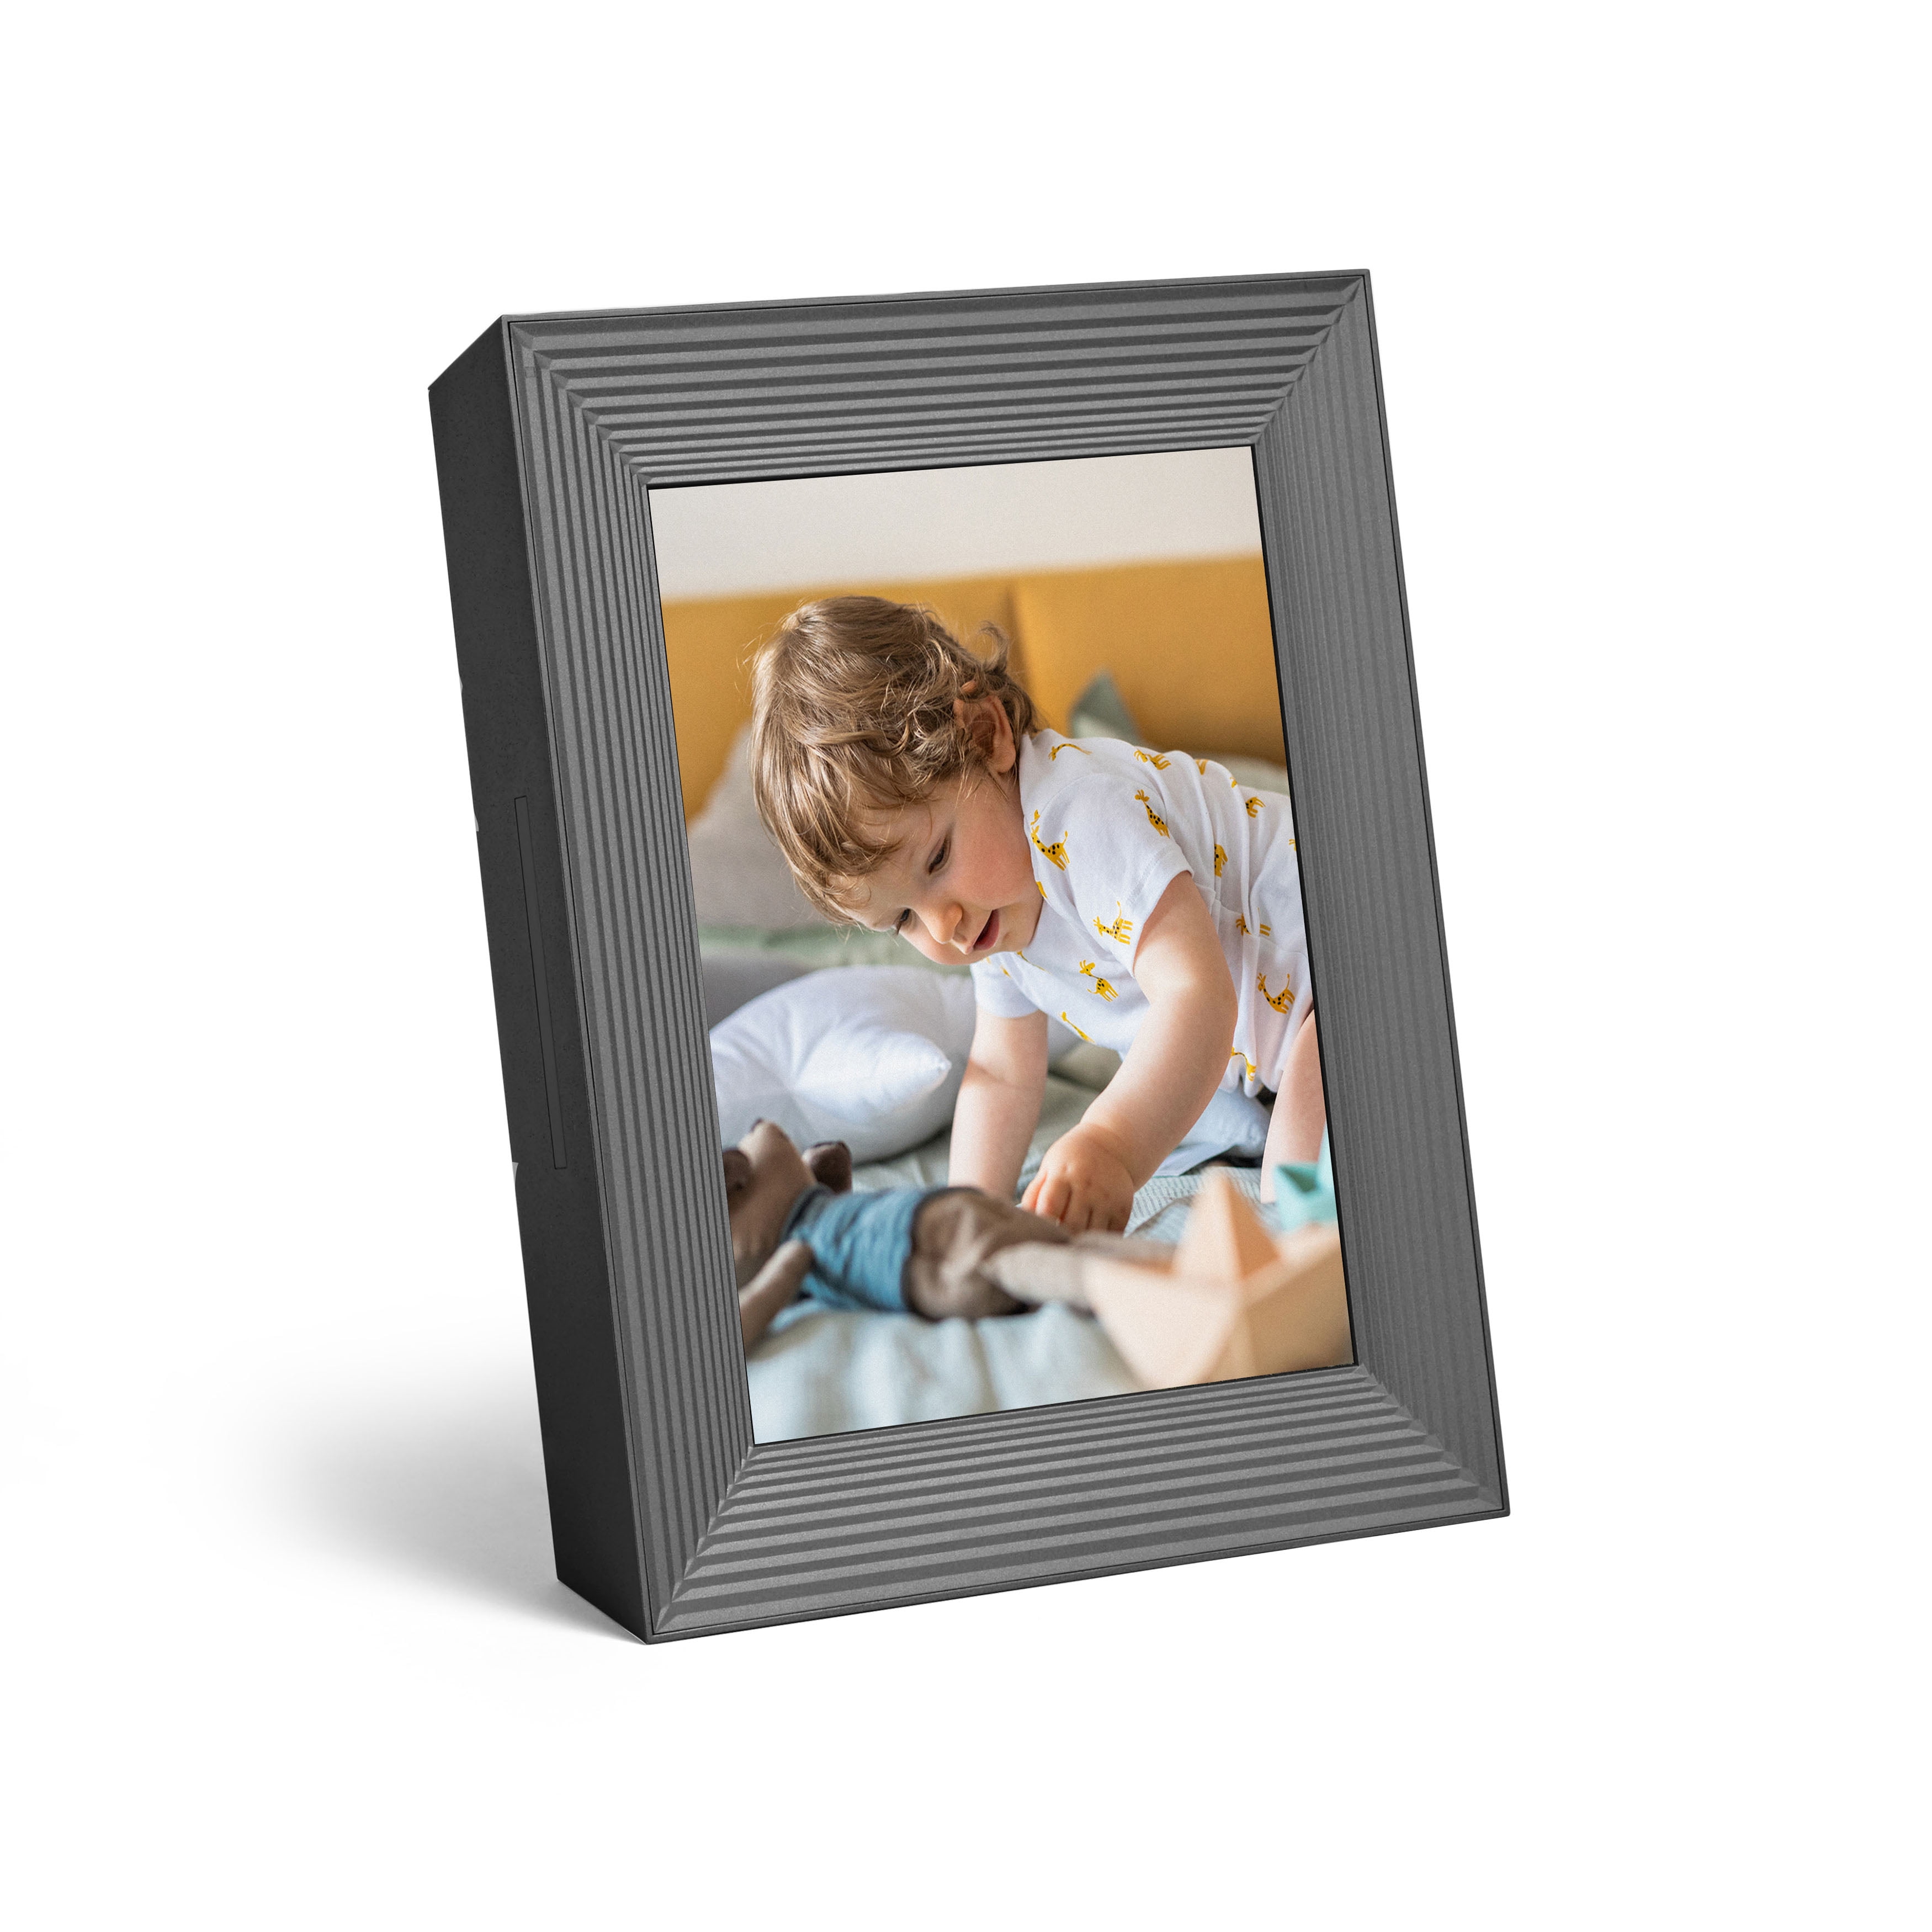 Mason by Aura Frames 9-inch HD Wi-Fi Digital Picture Frame with Free  Unlimited Storage - Graphite